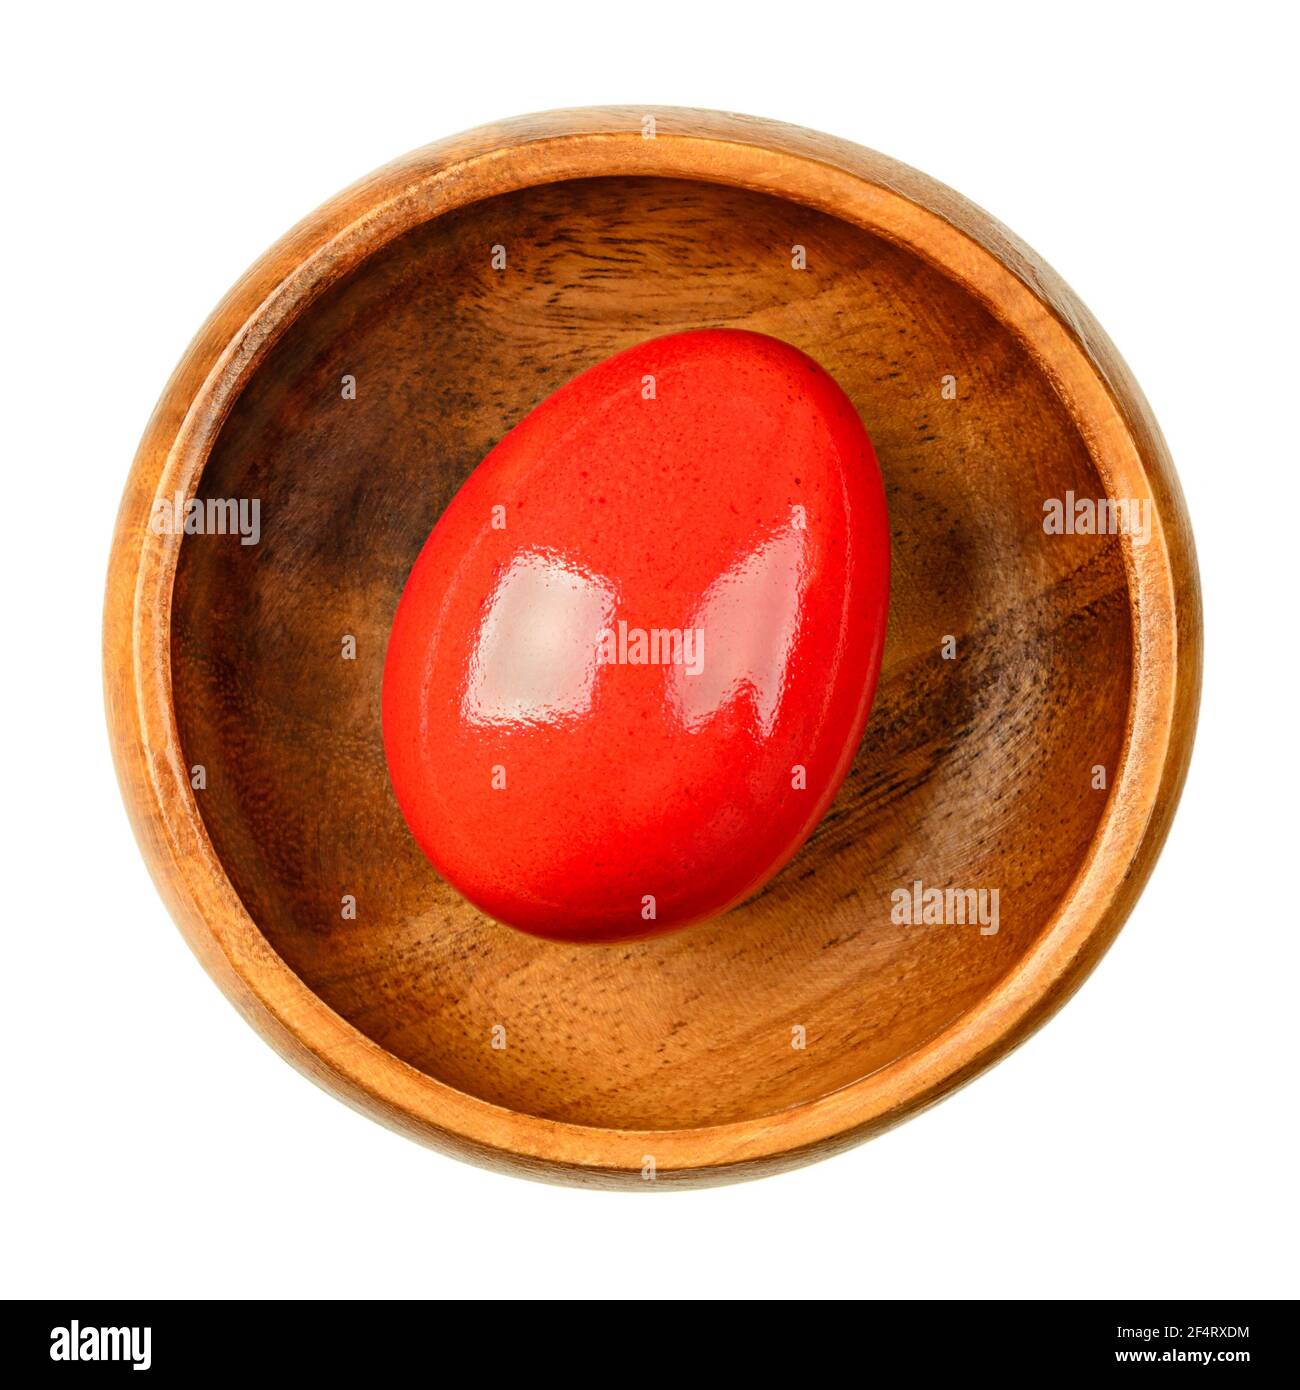 Red dyed Easter egg in a wooden bowl. Hard boiled, colorful dyed chicken egg. Edible Paschal egg, ready to eat, or for an Easter egg hunt. Close-up. Stock Photo